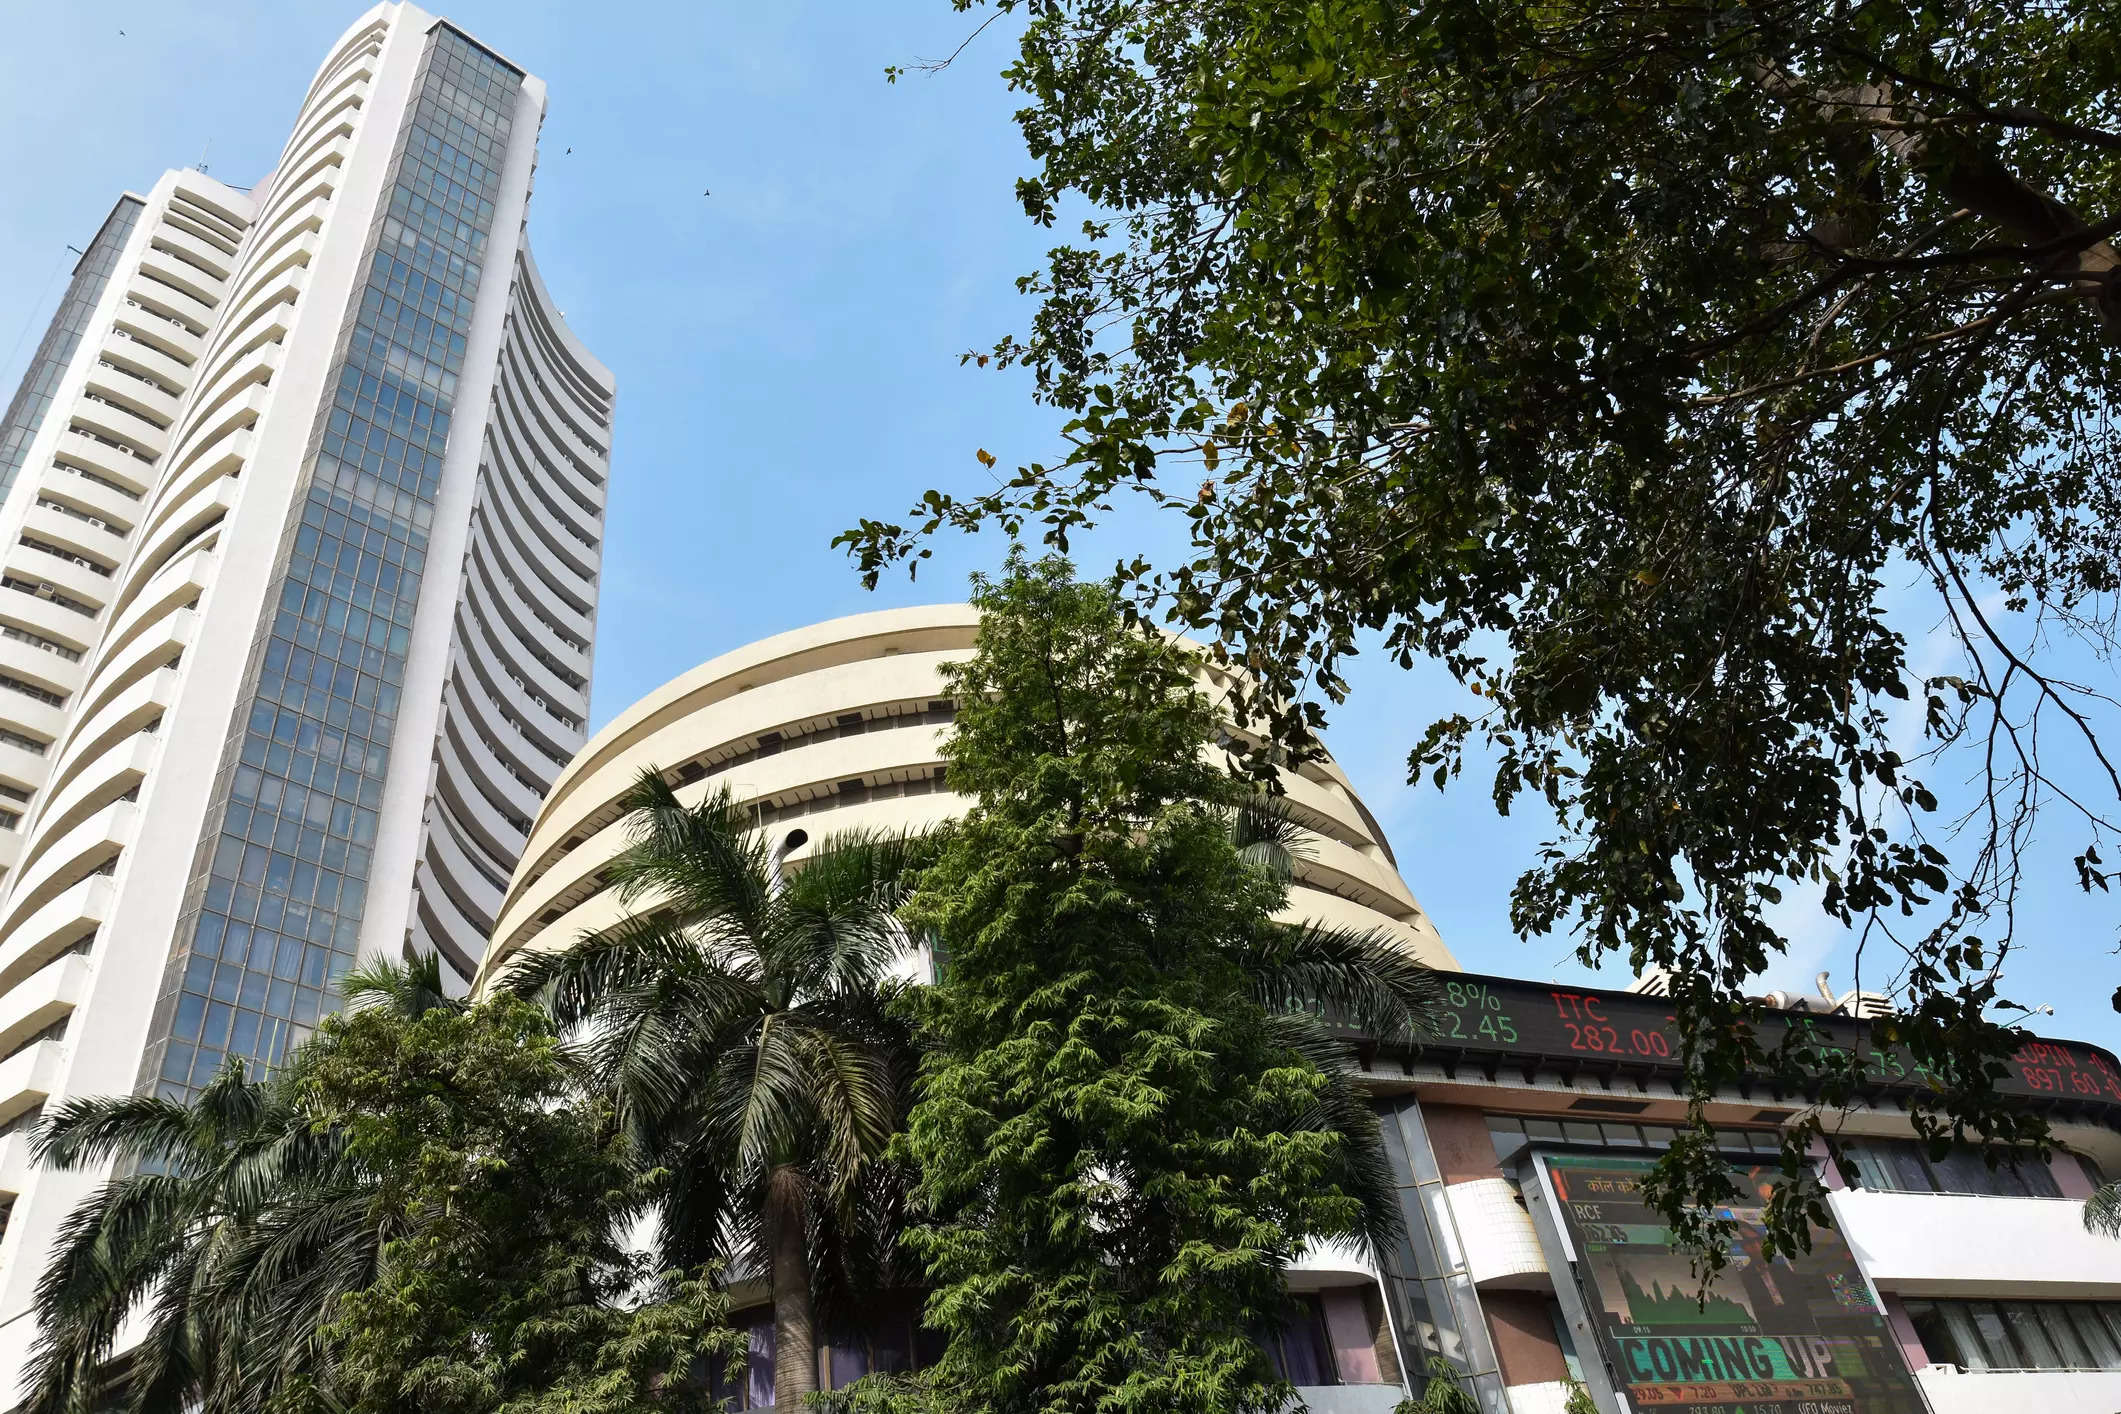 Sensex adds 400 points, Nifty breaches 18,150 in robust start to truncated week: Banks, auto stocks power rally